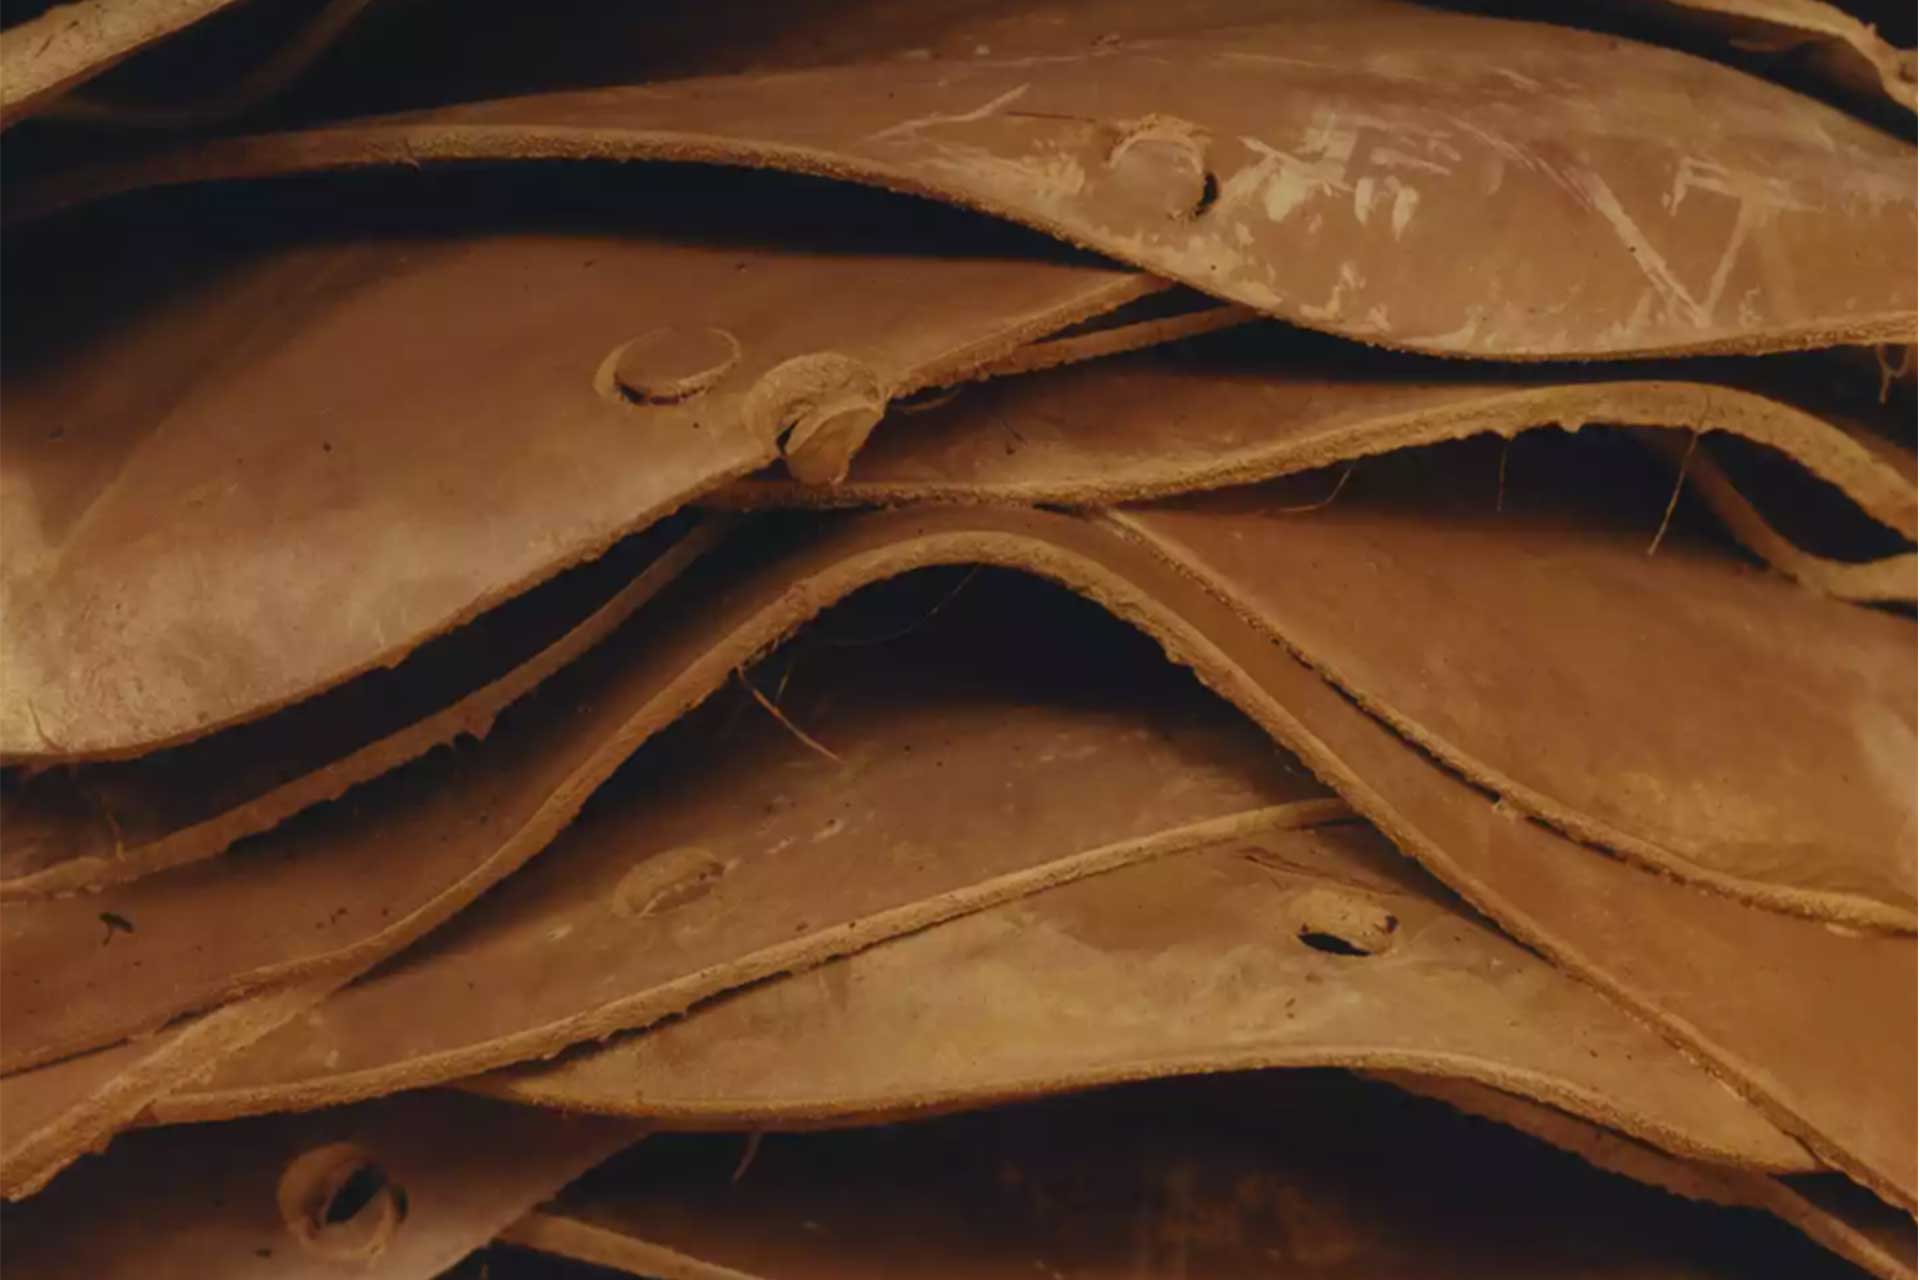 The historic Russia leather, which Hermès has renamed Volynka leather